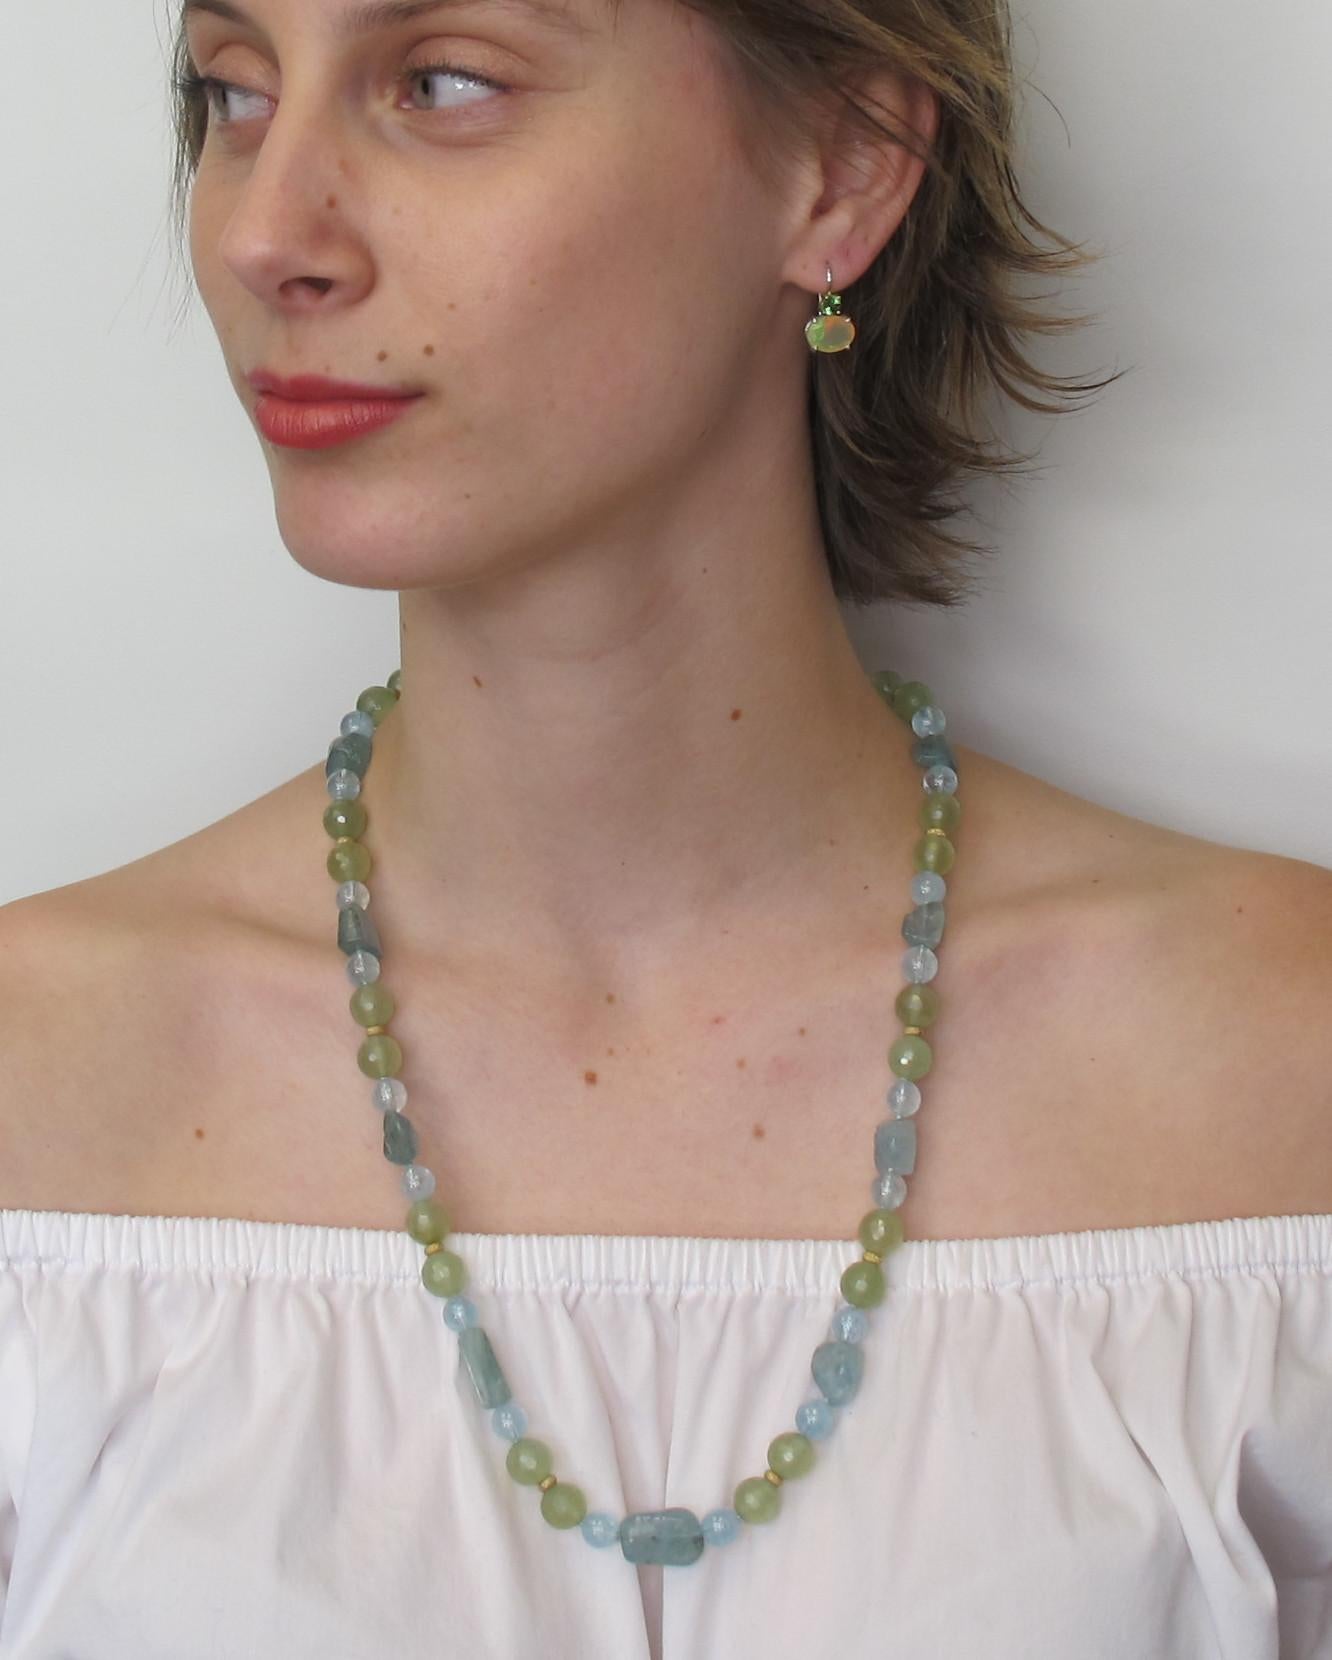 Aquamarine, Peridot, Phrenite and Tsavorite Beaded Necklace with Gold Accents For Sale 1